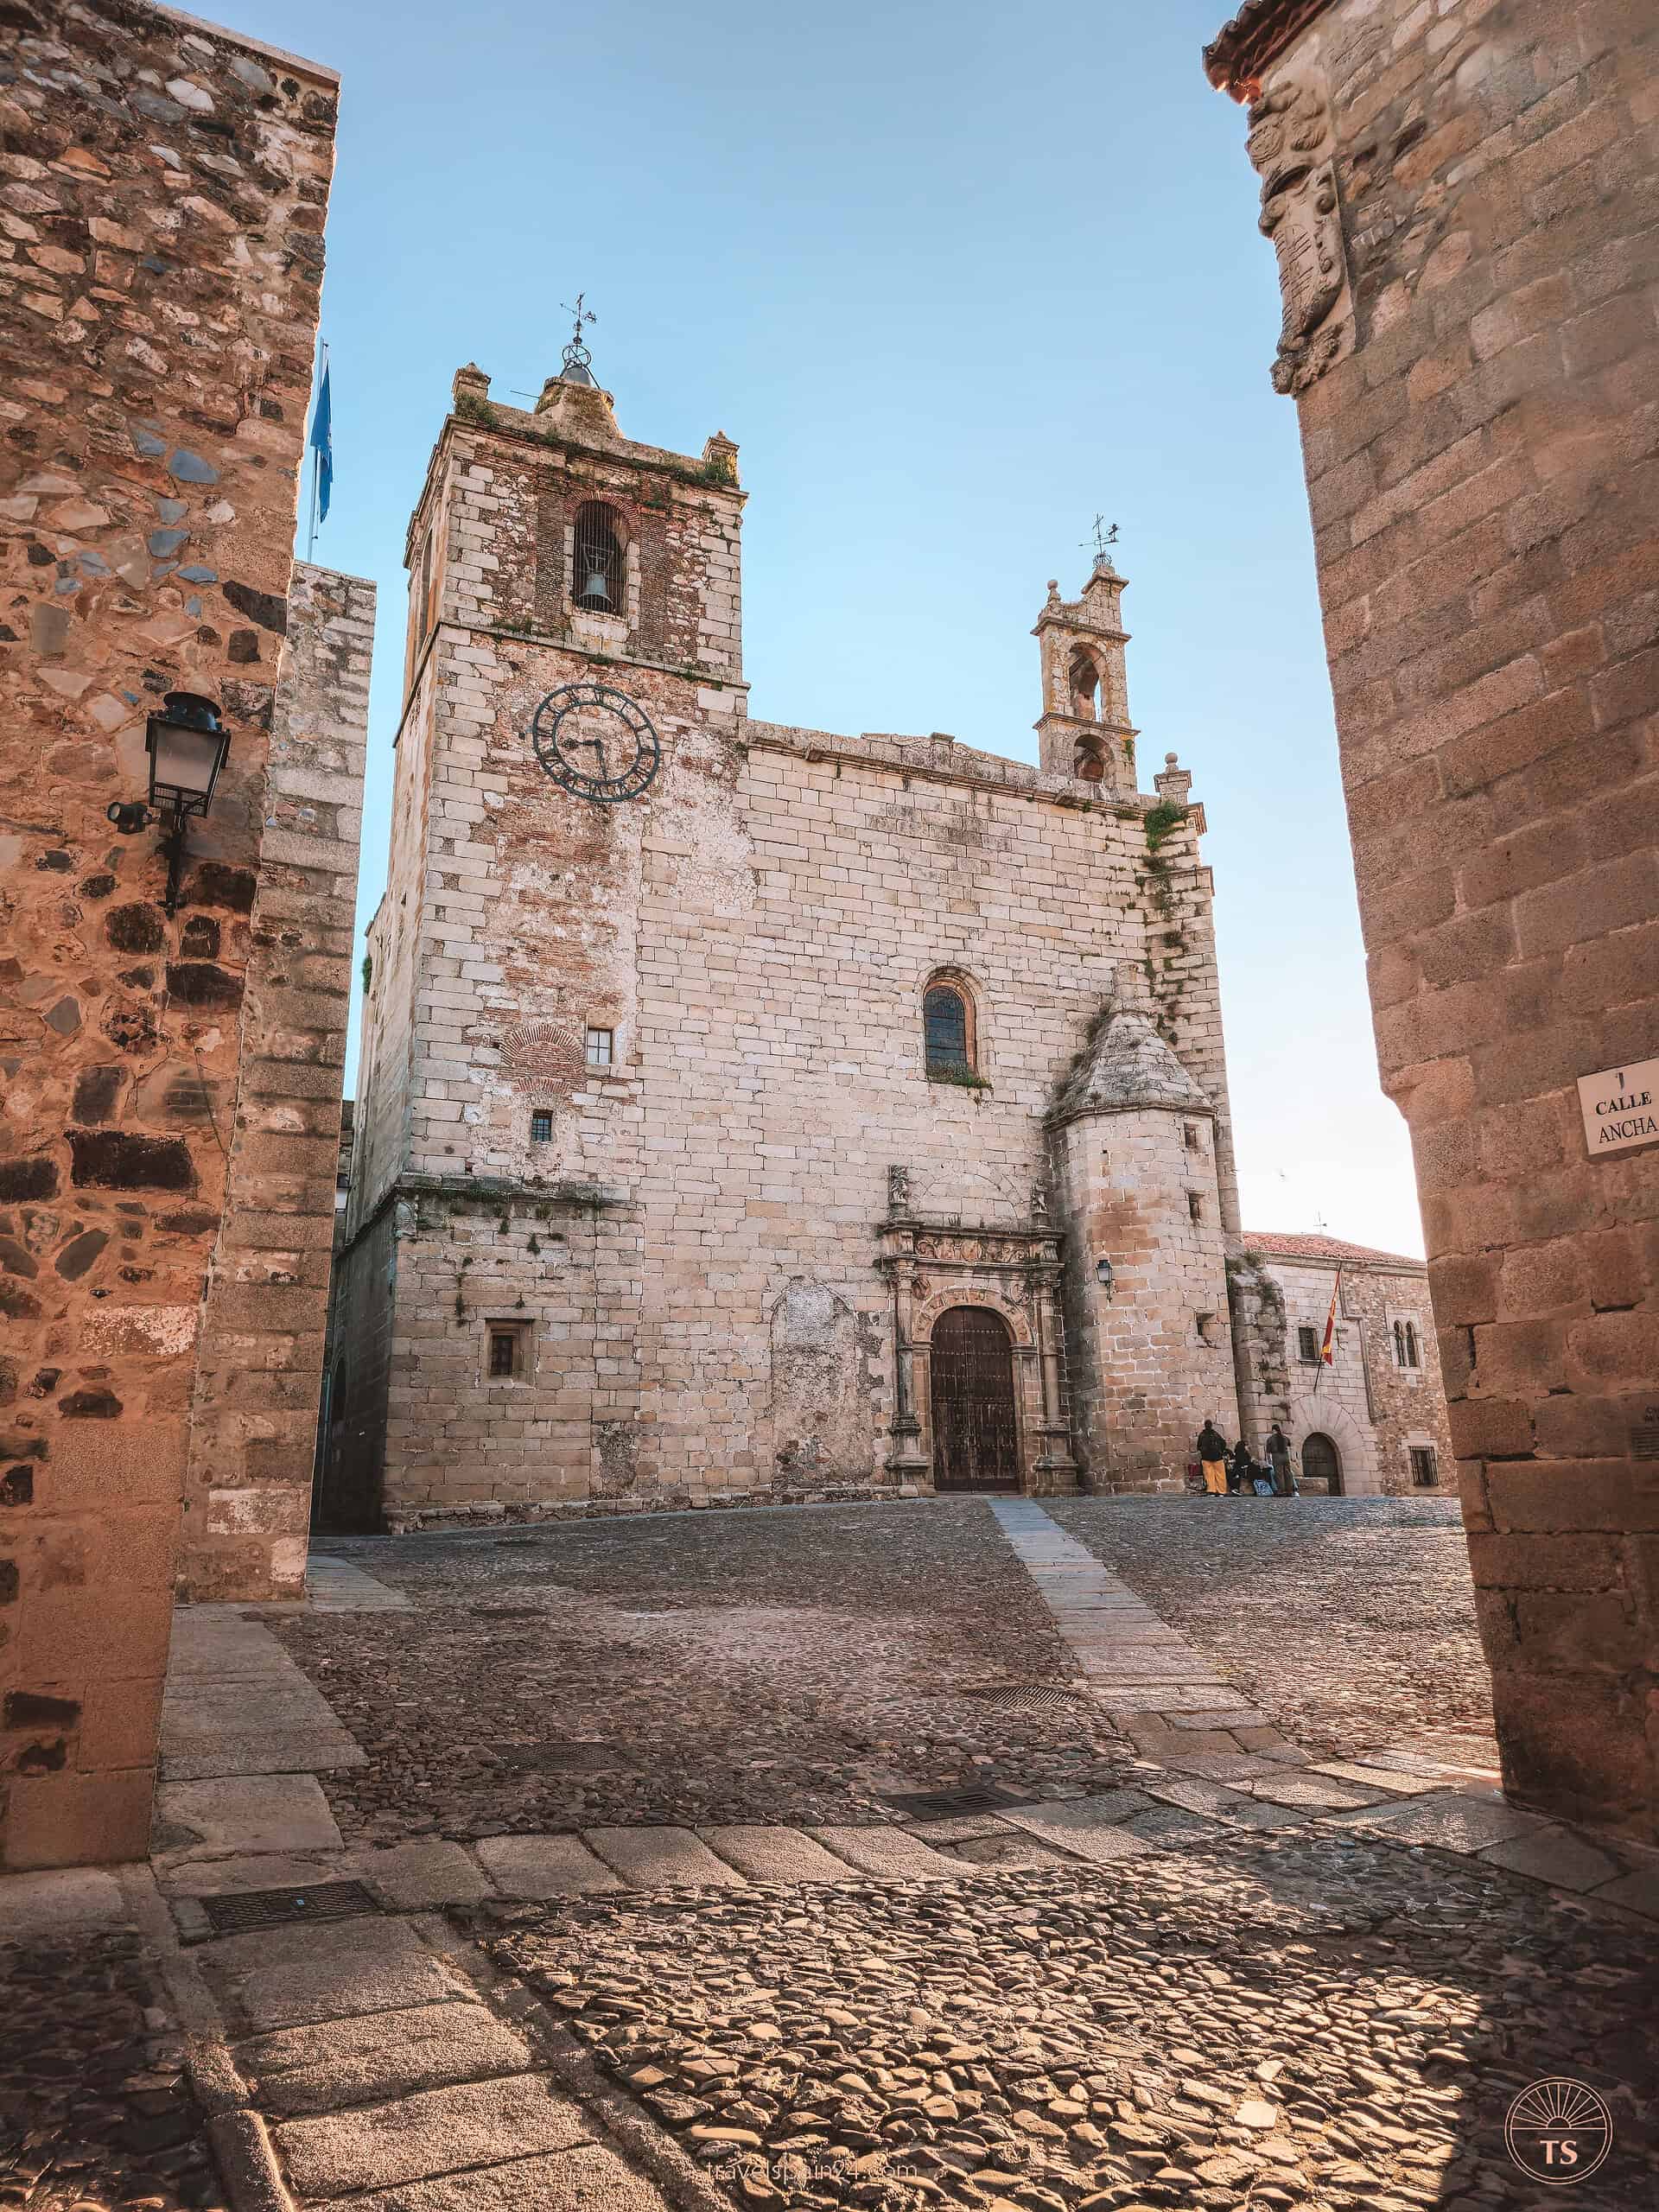 Front view of Iglesia de San Mateo at Plaza de San Mateo in Cáceres, under a bright morning sky with the sun casting shadows along the historic walls.